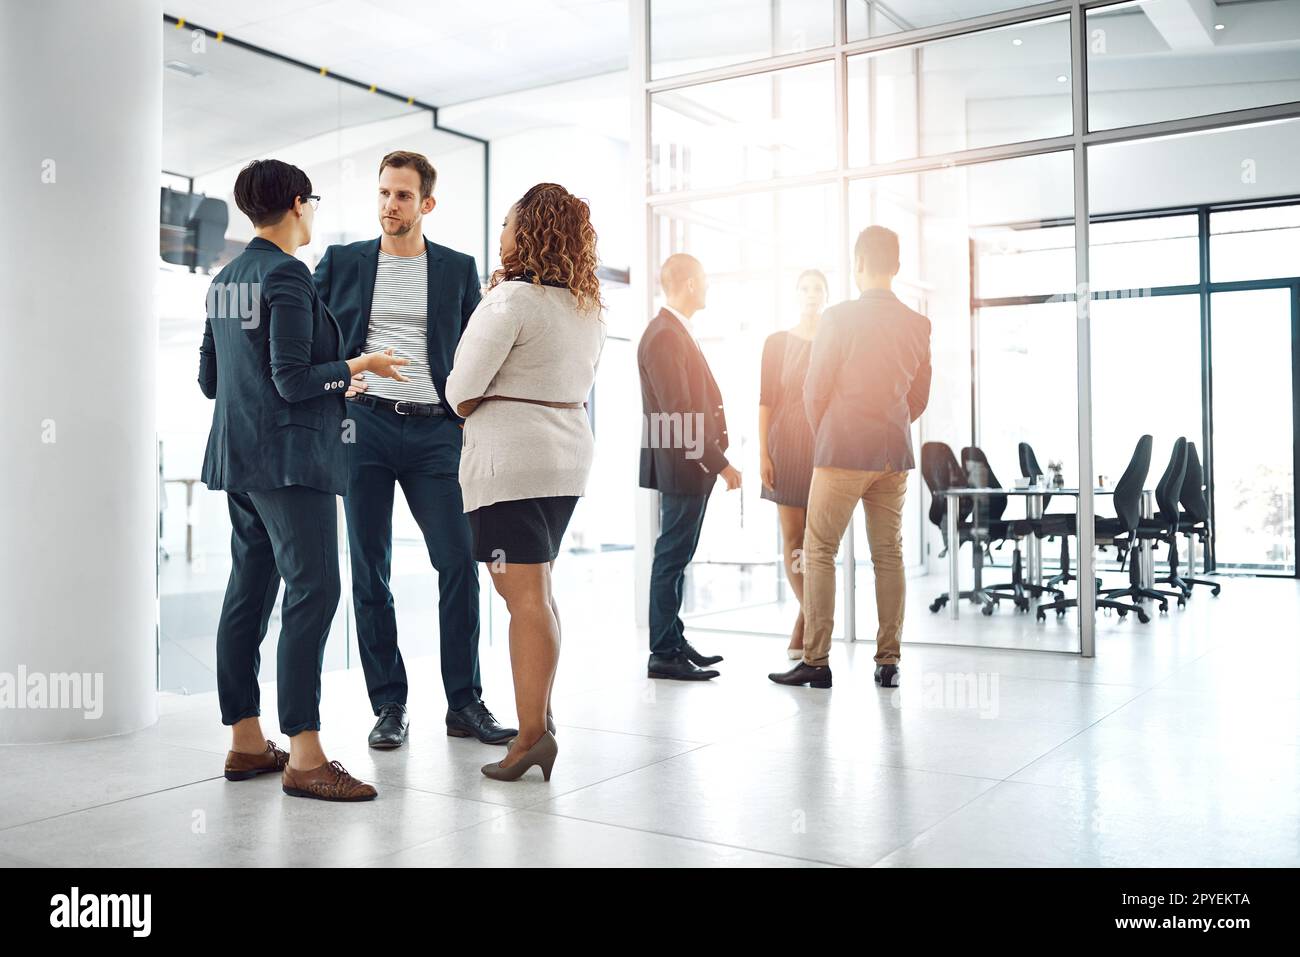 Conversations to improve the business. businesspeople having a conversation in the office. Stock Photo